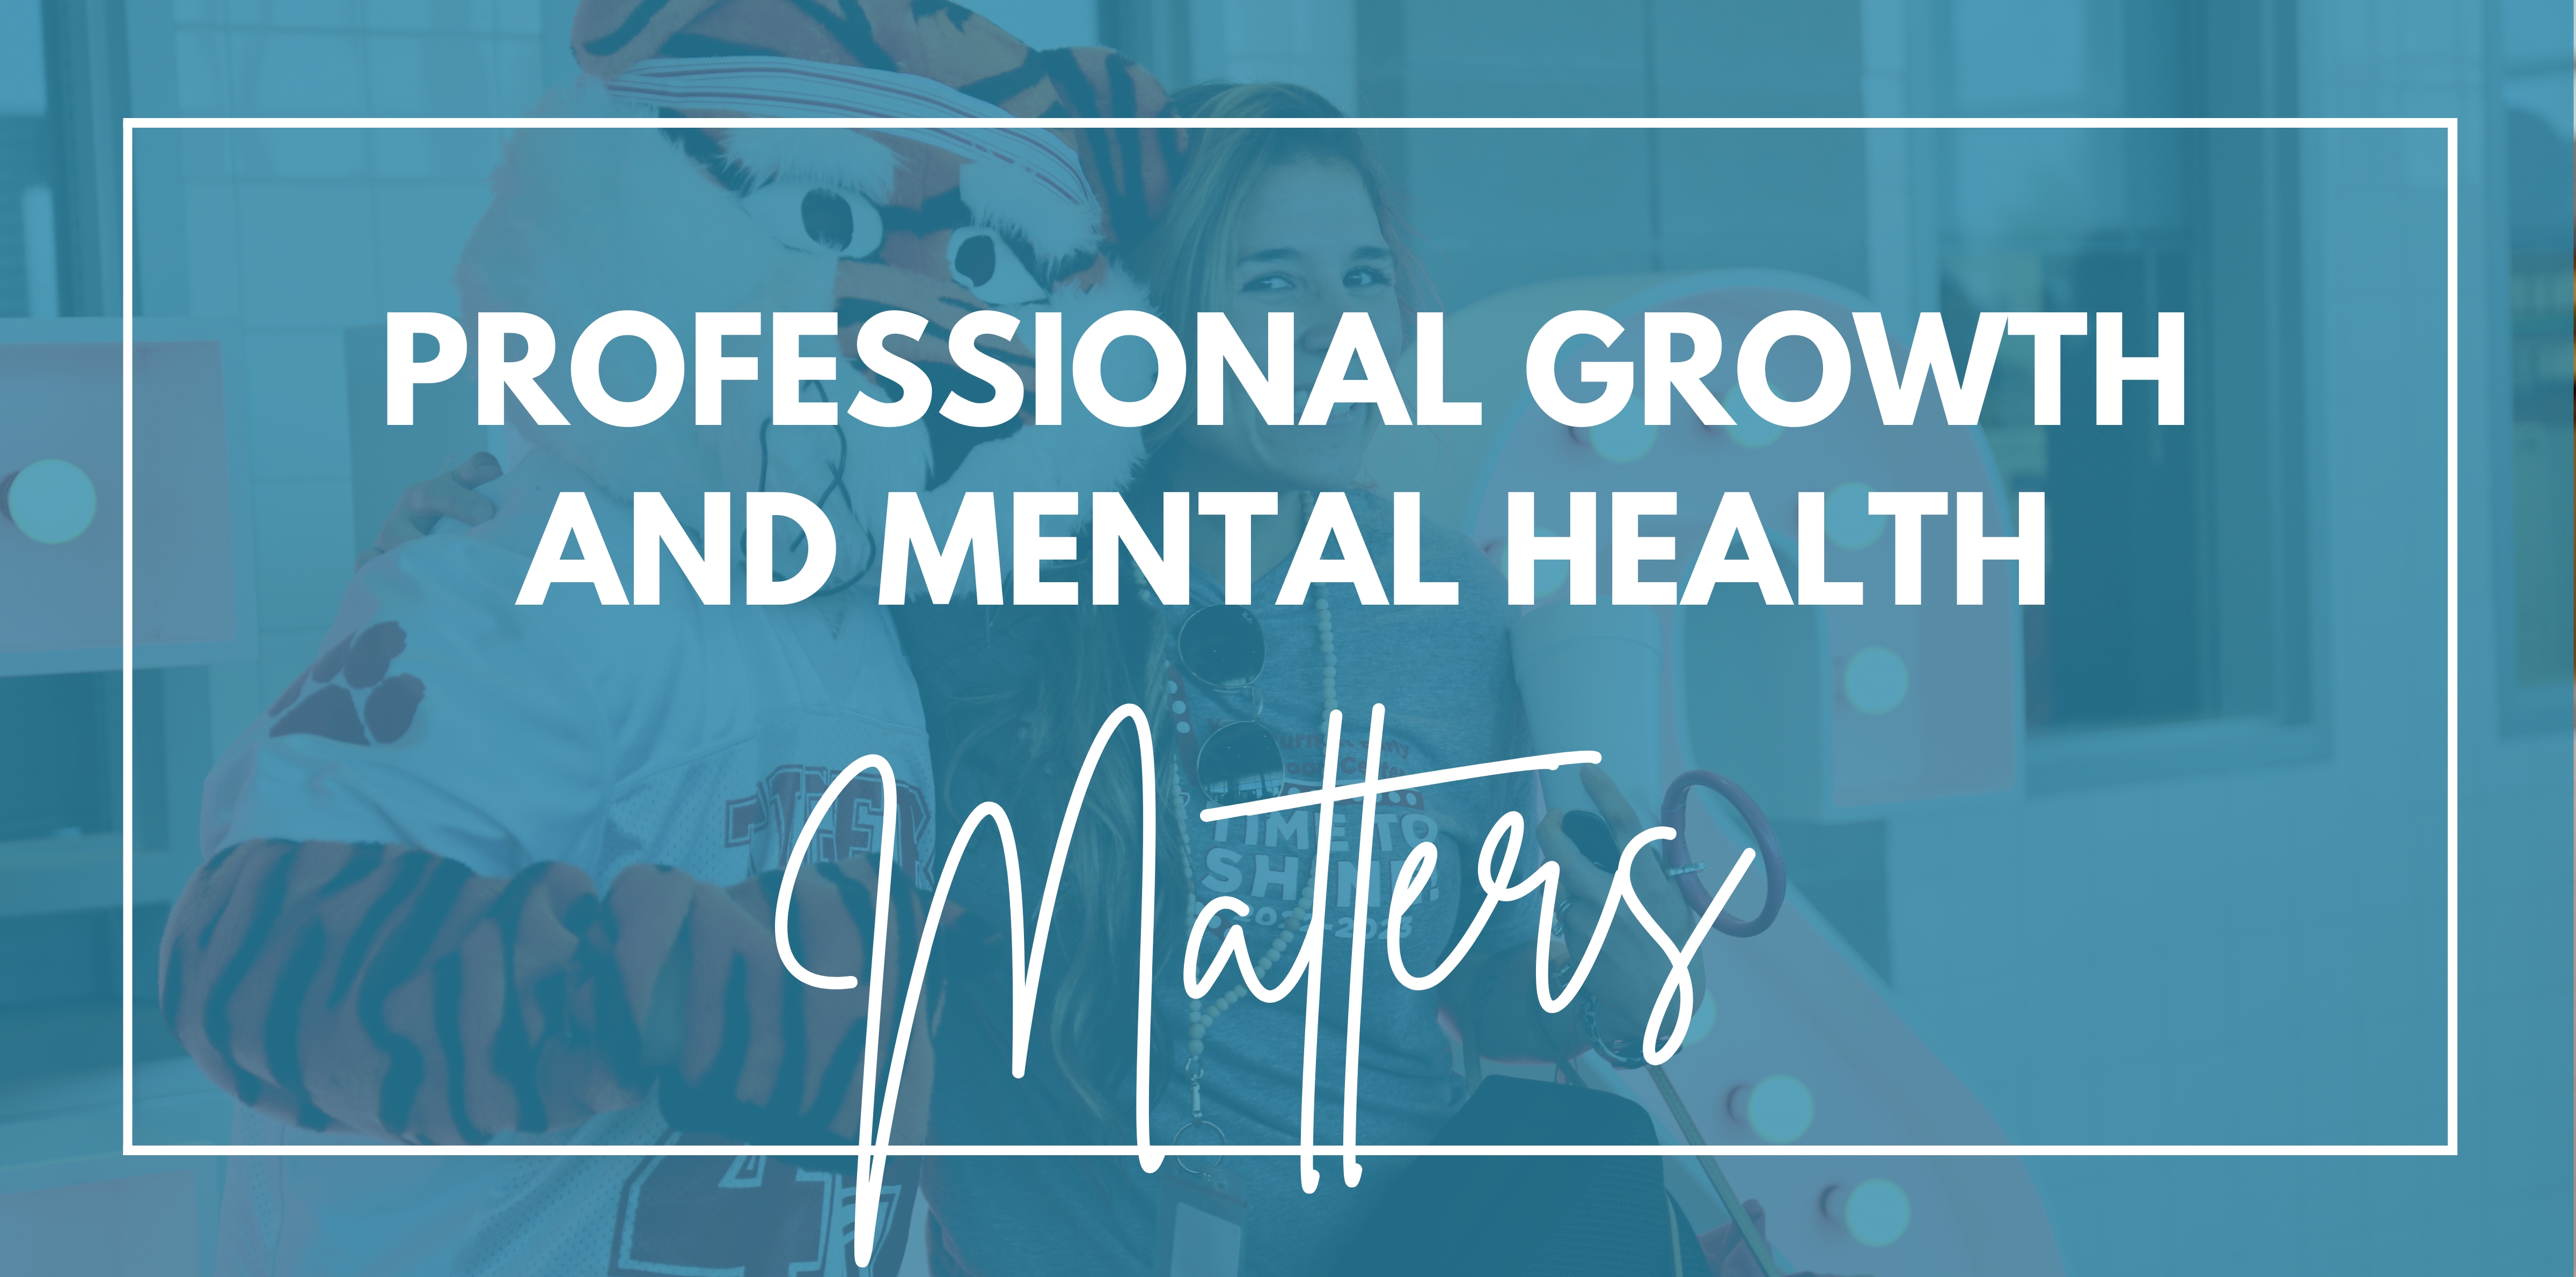 Professional Growth and Mental Health Matters